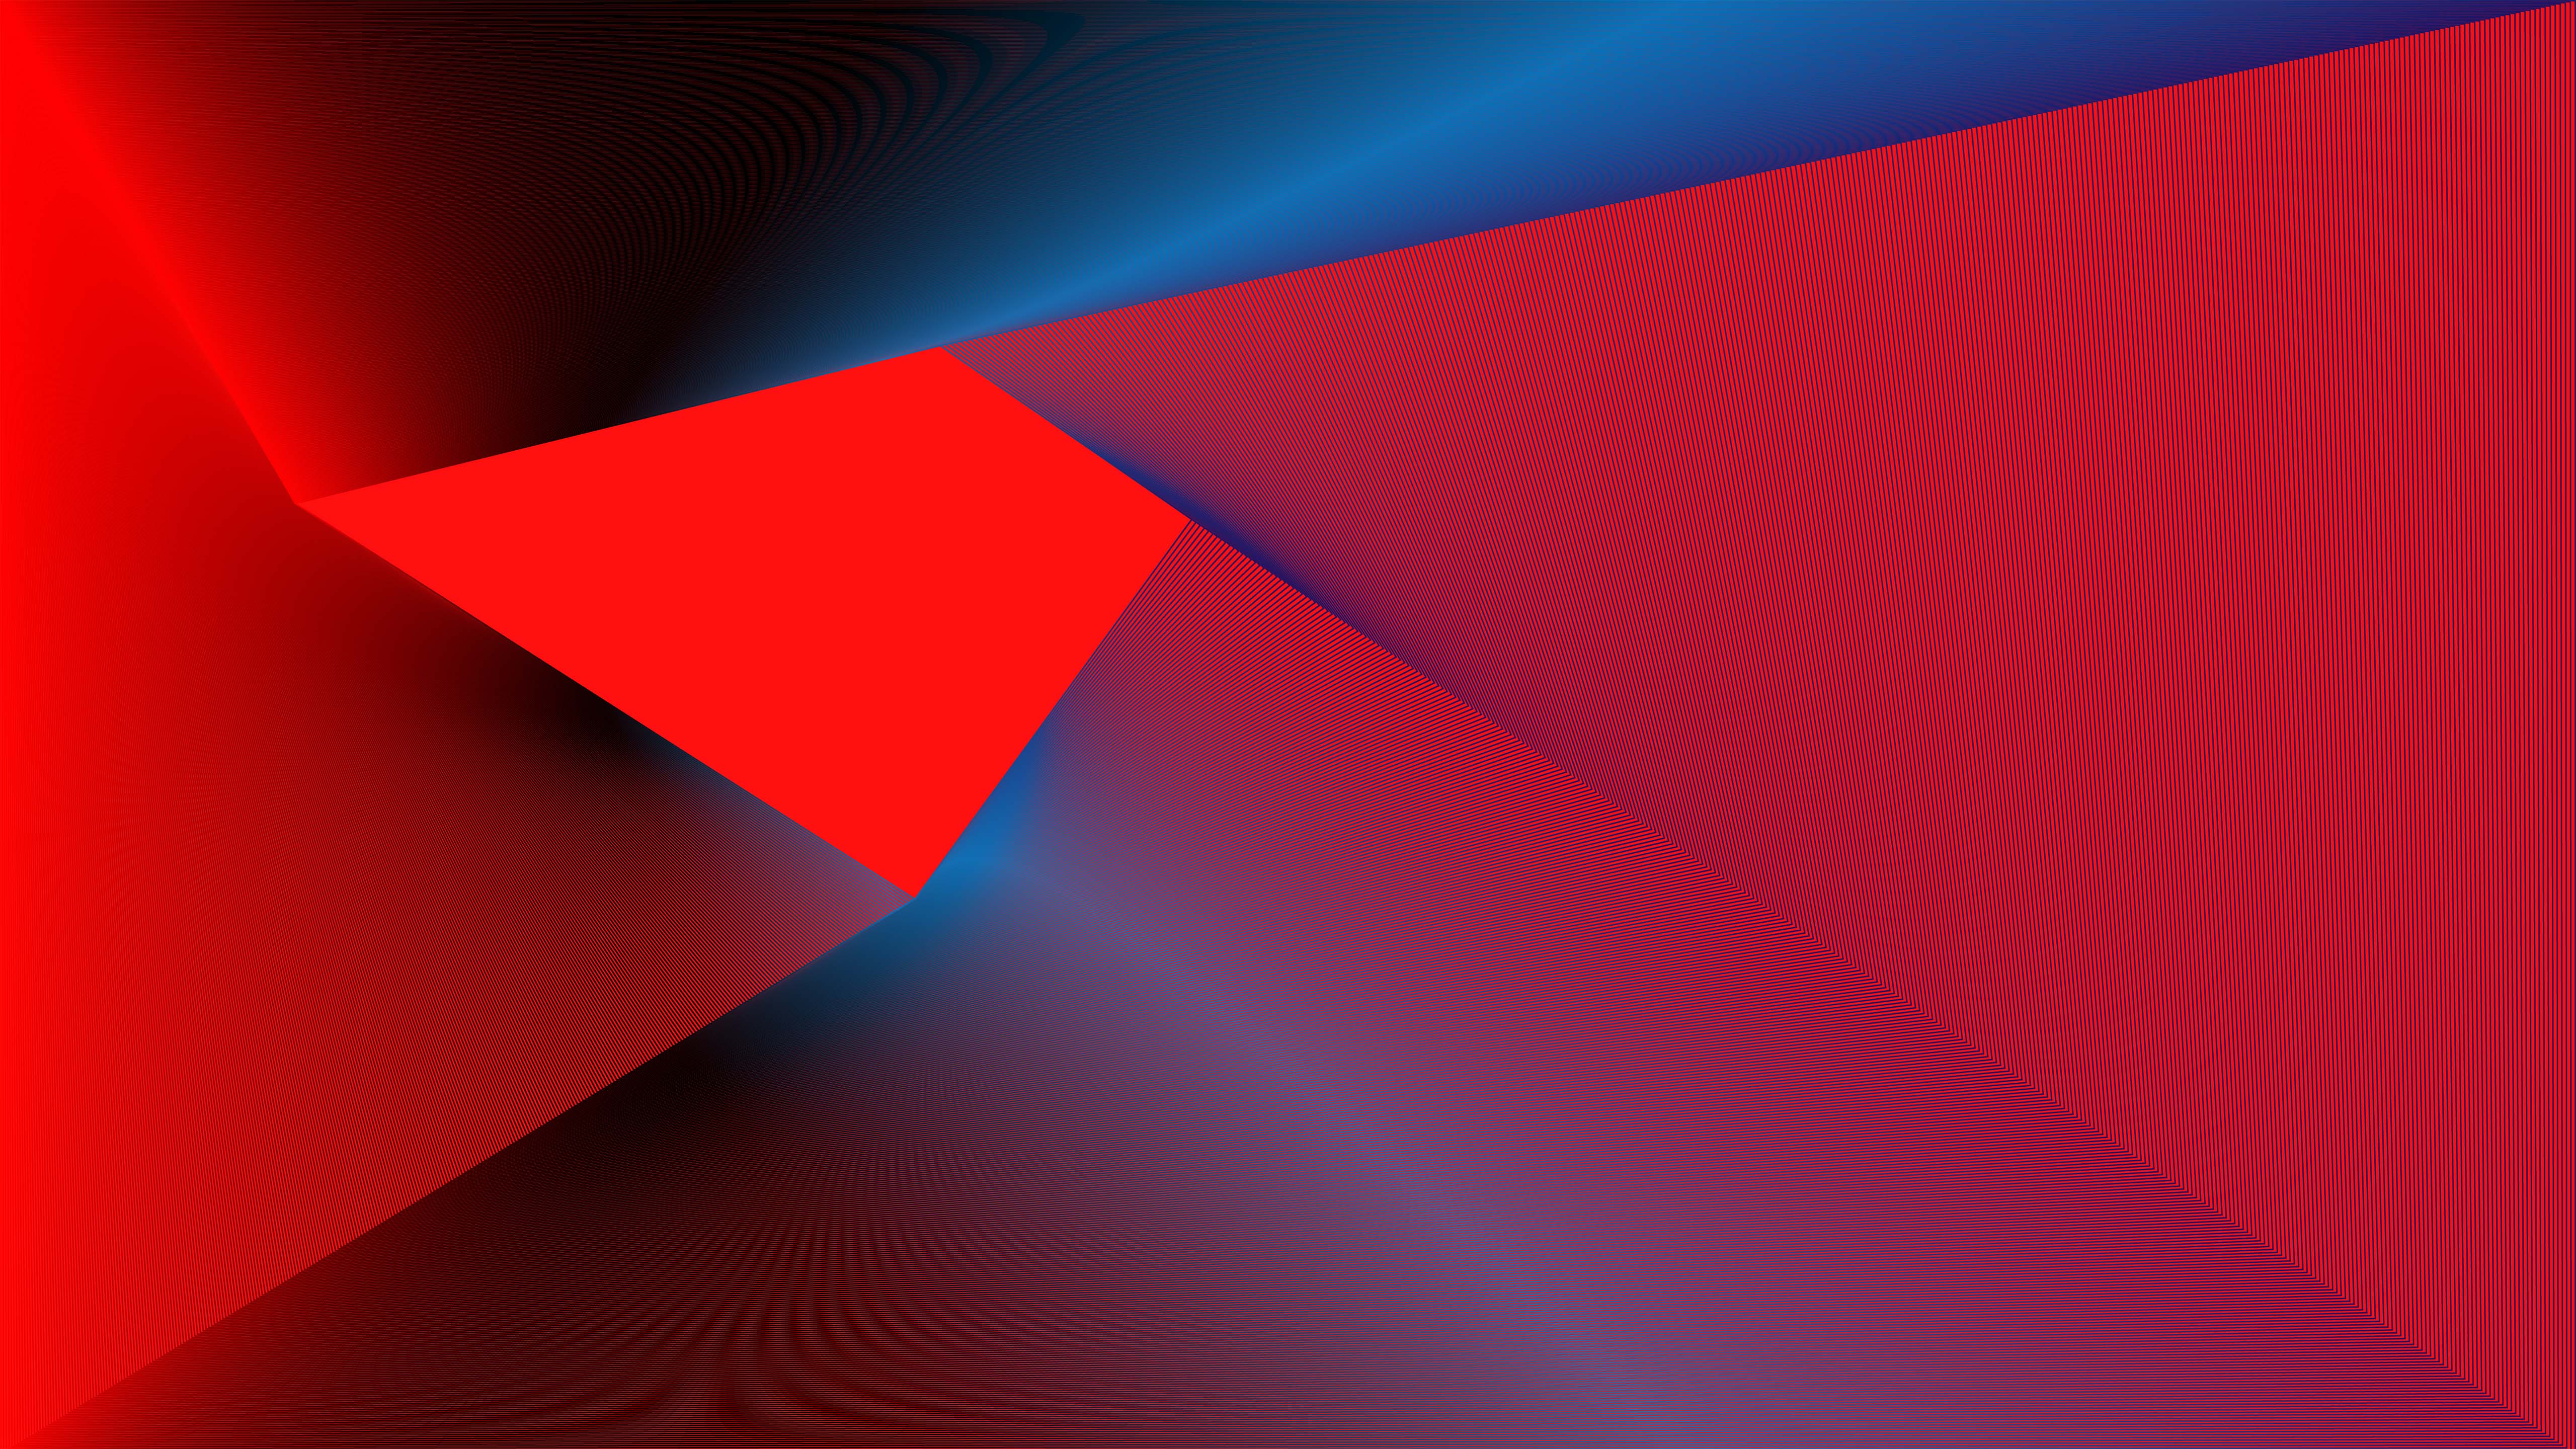 red_and_blue_artistic_4k_5k_hd_abstract